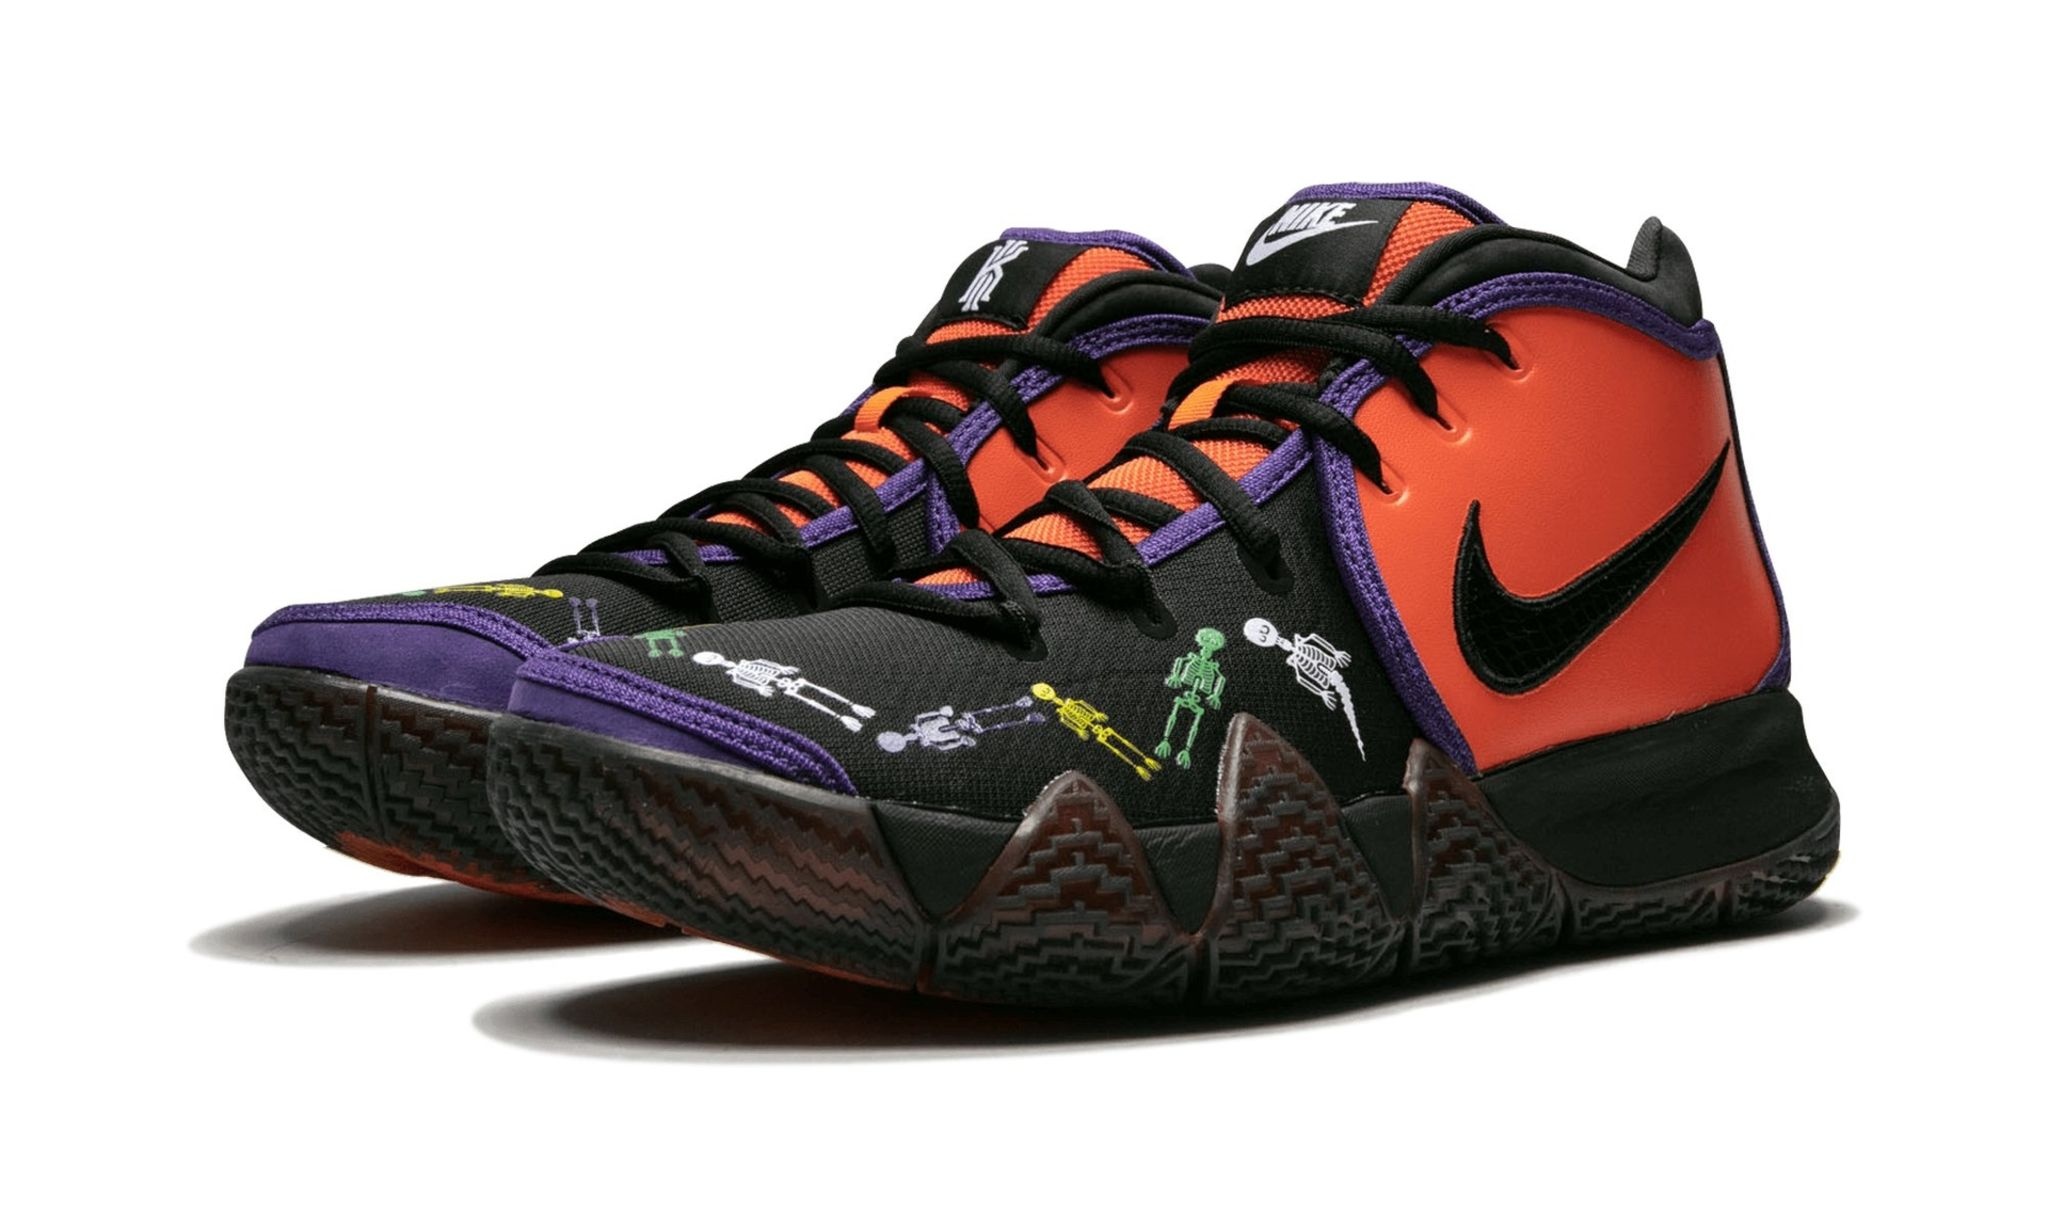 Kyrie 4 Dotd Tv PE 1 "Day of the Dead" - 2